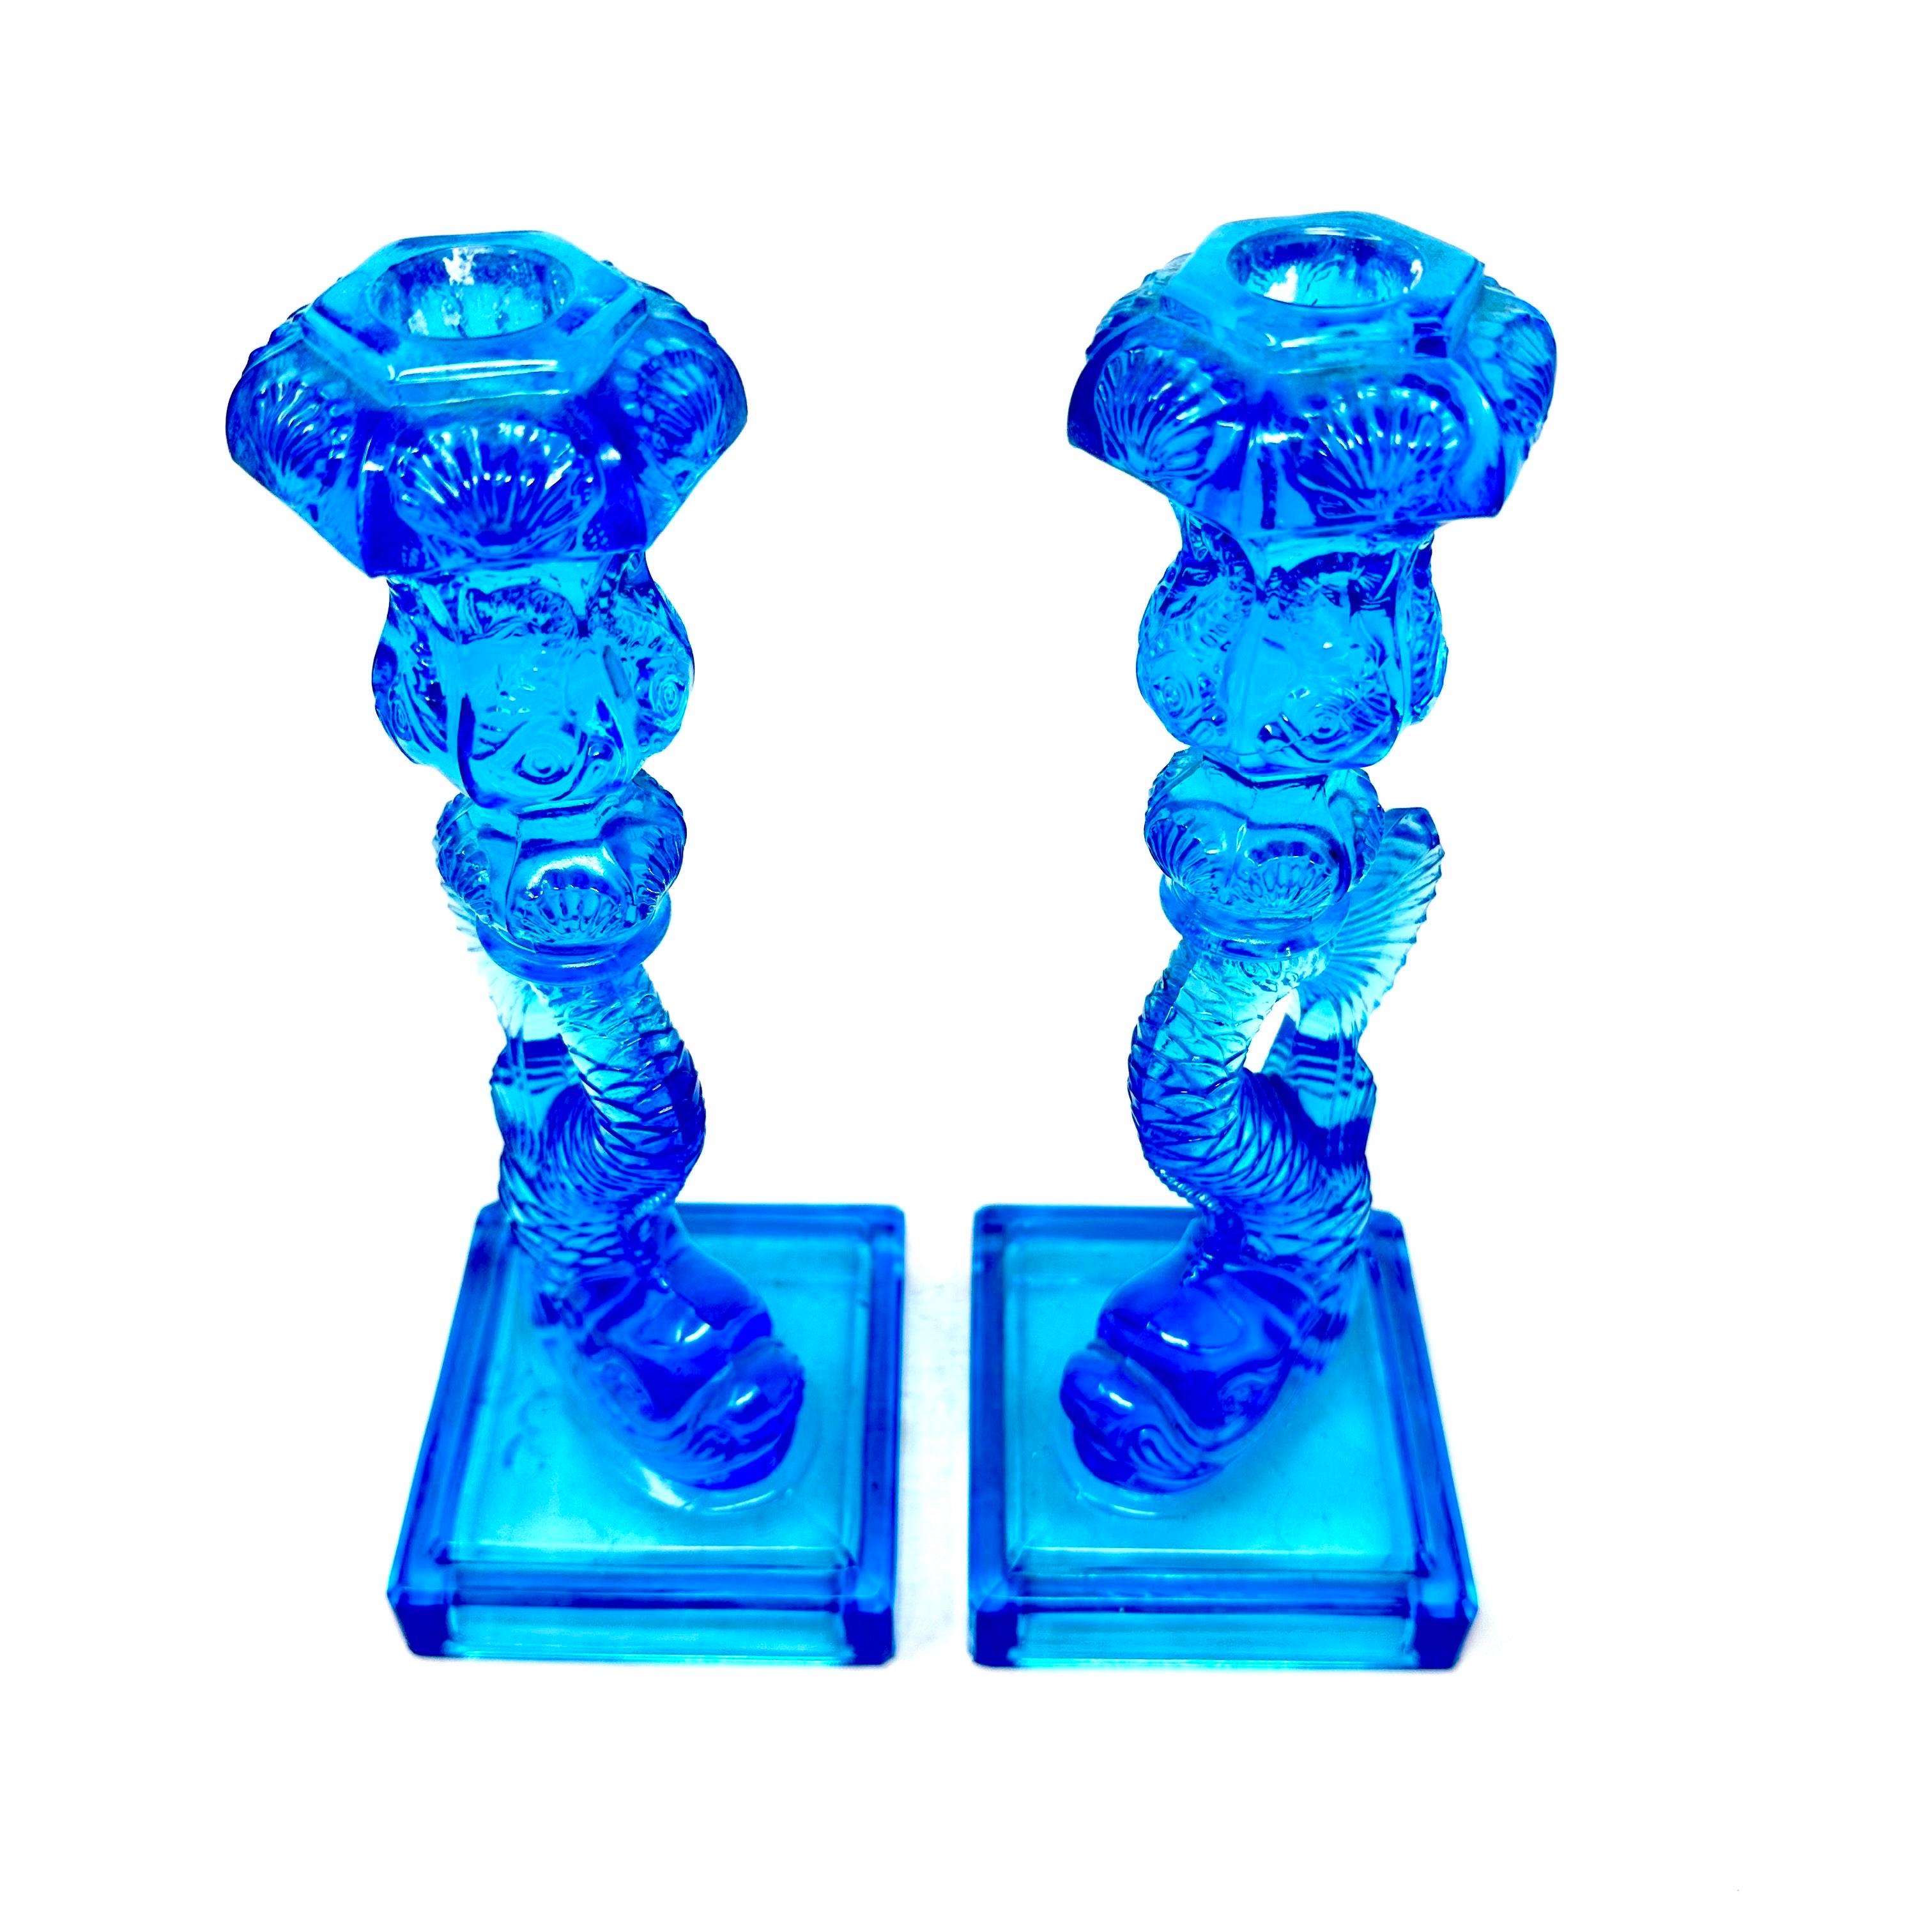 Pair of 1970s blue glass koi fish candlesticks by Imperial for the Museum of Metropolitan Art, New York. In excellent condition, marked “MMA” on the underside. Price is for the pair.

Width: 4 in / Depth: 4 in / Height: 11 in